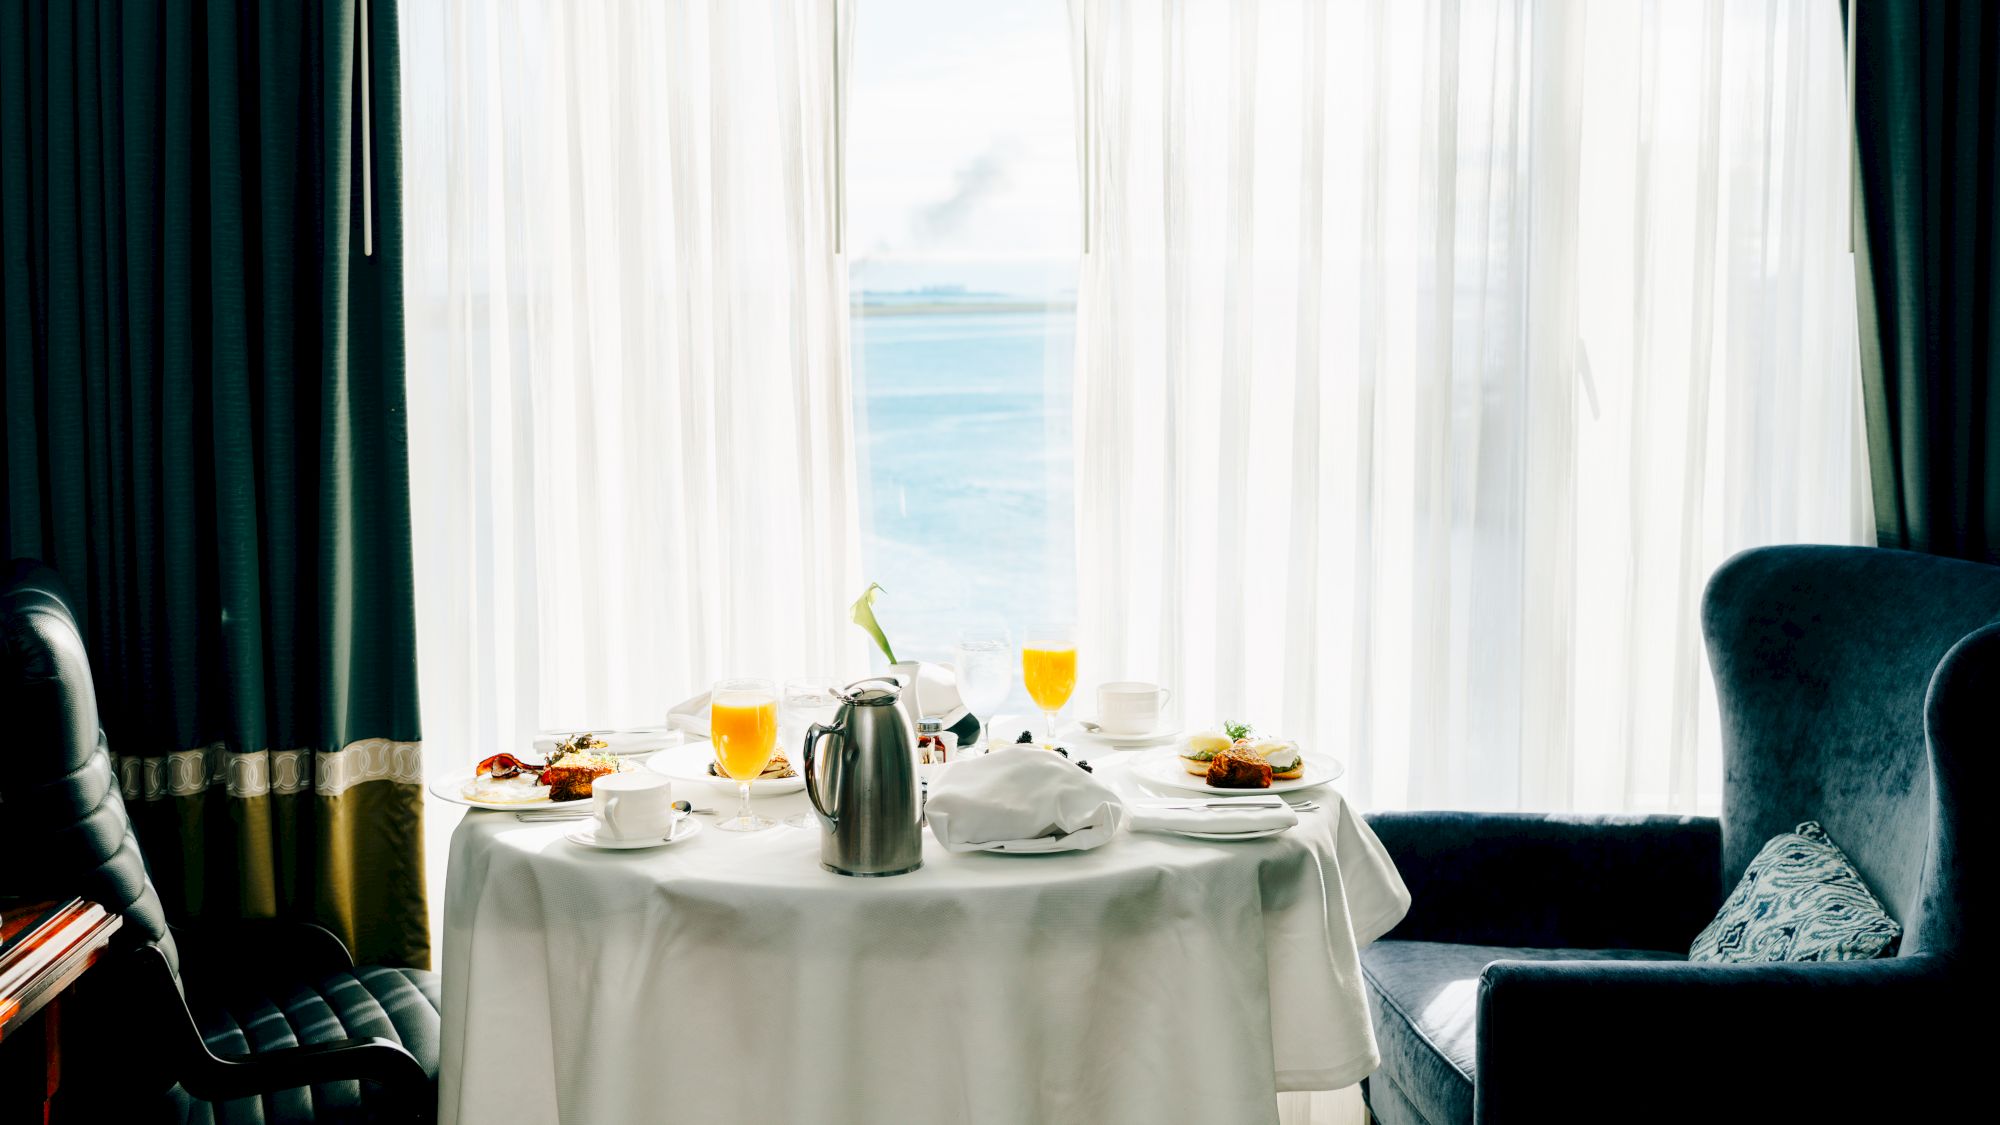 A table set for two with breakfast, a view of the ocean through curtains.